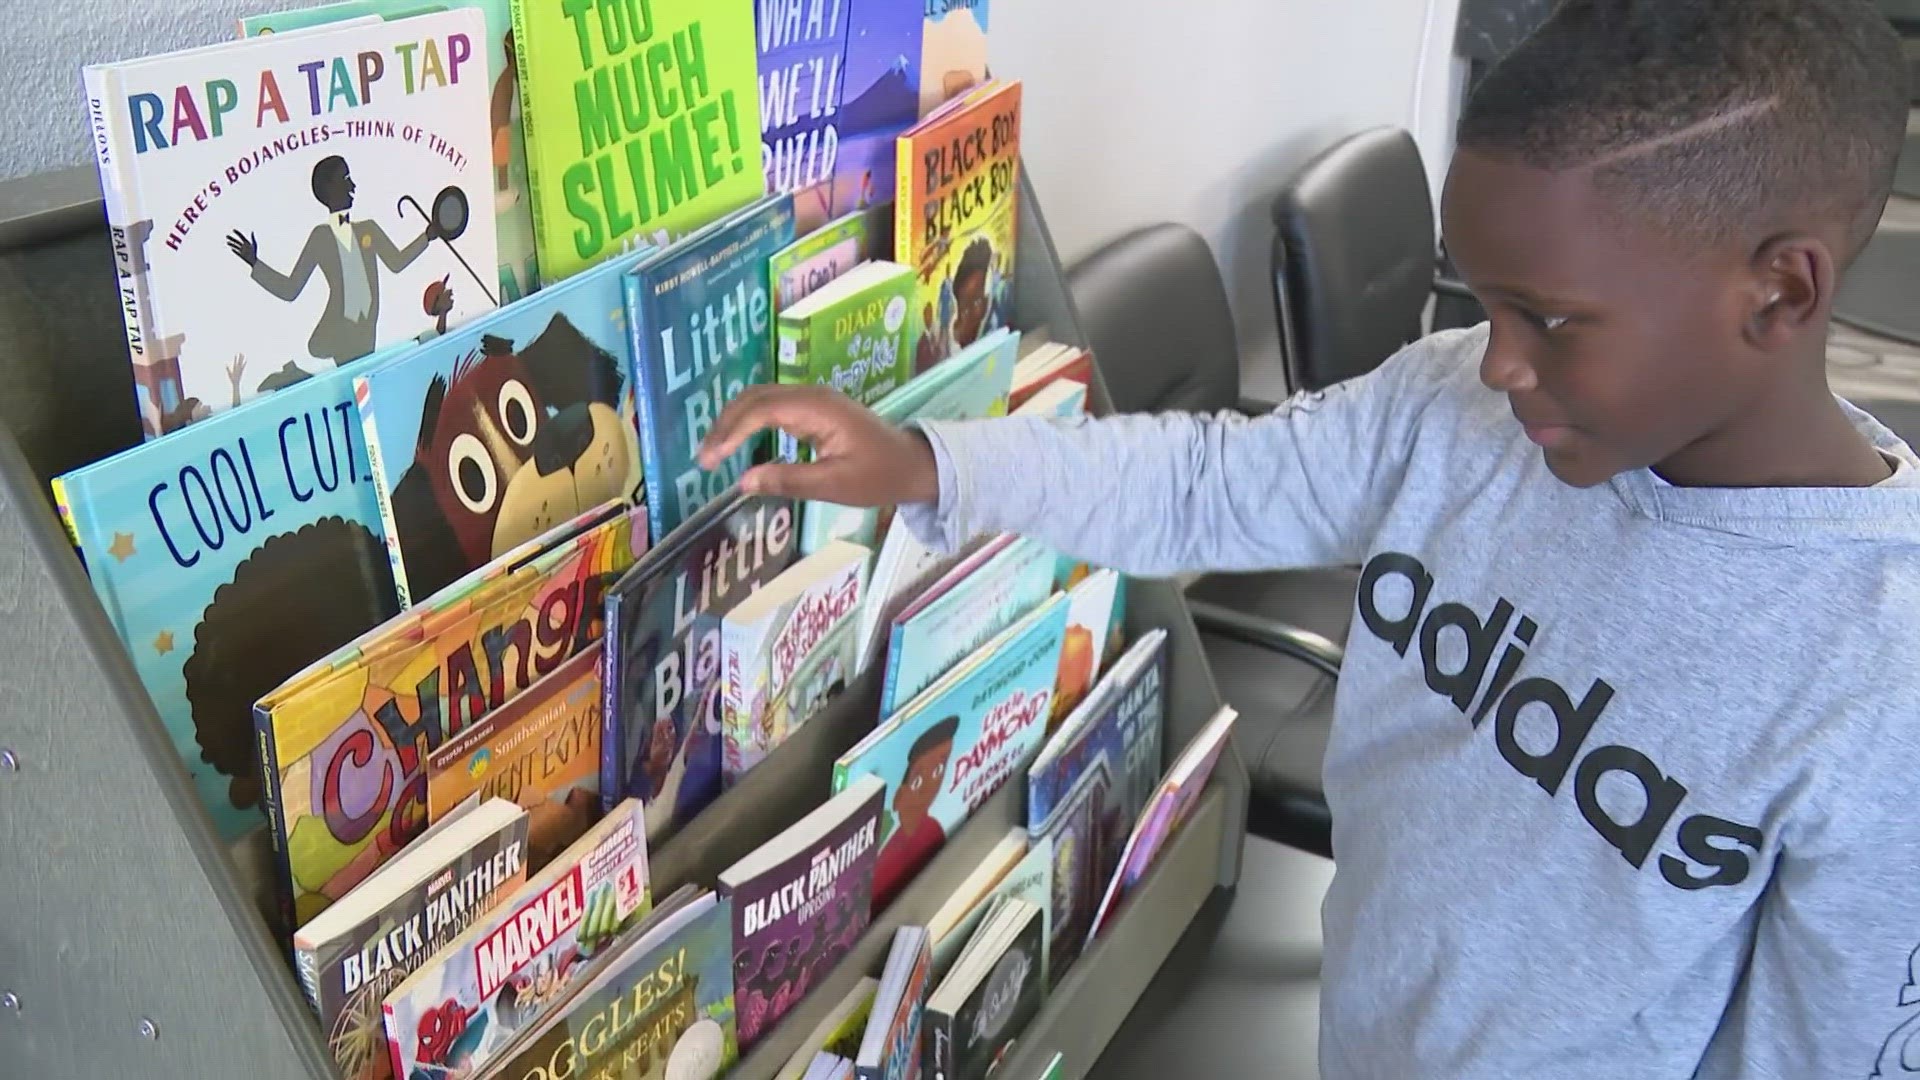 The graduate chapter of Alpha Kappa Alpha Sorority runs and stocks two barbershop libraries, two "Little Free Libraries" and also hosts community book fairs.